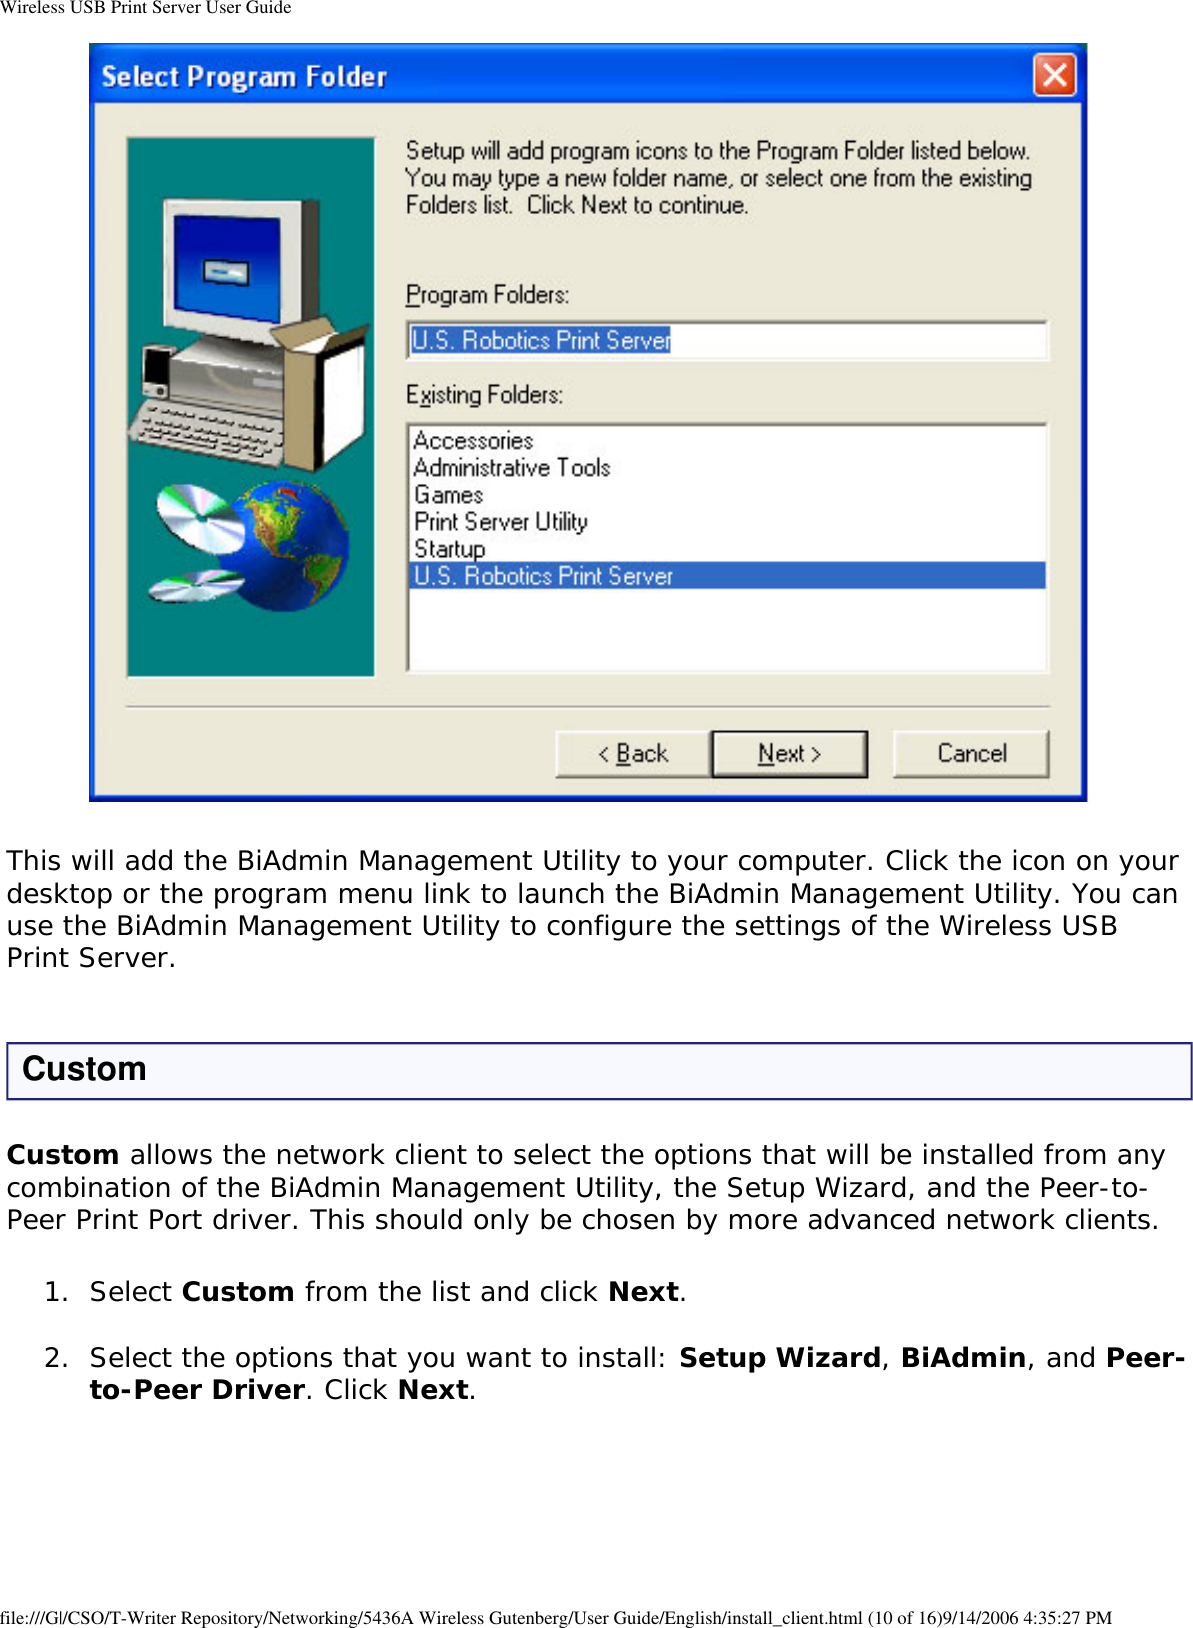 Wireless USB Print Server User Guide This will add the BiAdmin Management Utility to your computer. Click the icon on your desktop or the program menu link to launch the BiAdmin Management Utility. You can use the BiAdmin Management Utility to configure the settings of the Wireless USB Print Server. CustomCustom allows the network client to select the options that will be installed from any combination of the BiAdmin Management Utility, the Setup Wizard, and the Peer-to-Peer Print Port driver. This should only be chosen by more advanced network clients.1.  Select Custom from the list and click Next. 2.  Select the options that you want to install: Setup Wizard, BiAdmin, and Peer-to-Peer Driver. Click Next.  file:///G|/CSO/T-Writer Repository/Networking/5436A Wireless Gutenberg/User Guide/English/install_client.html (10 of 16)9/14/2006 4:35:27 PM